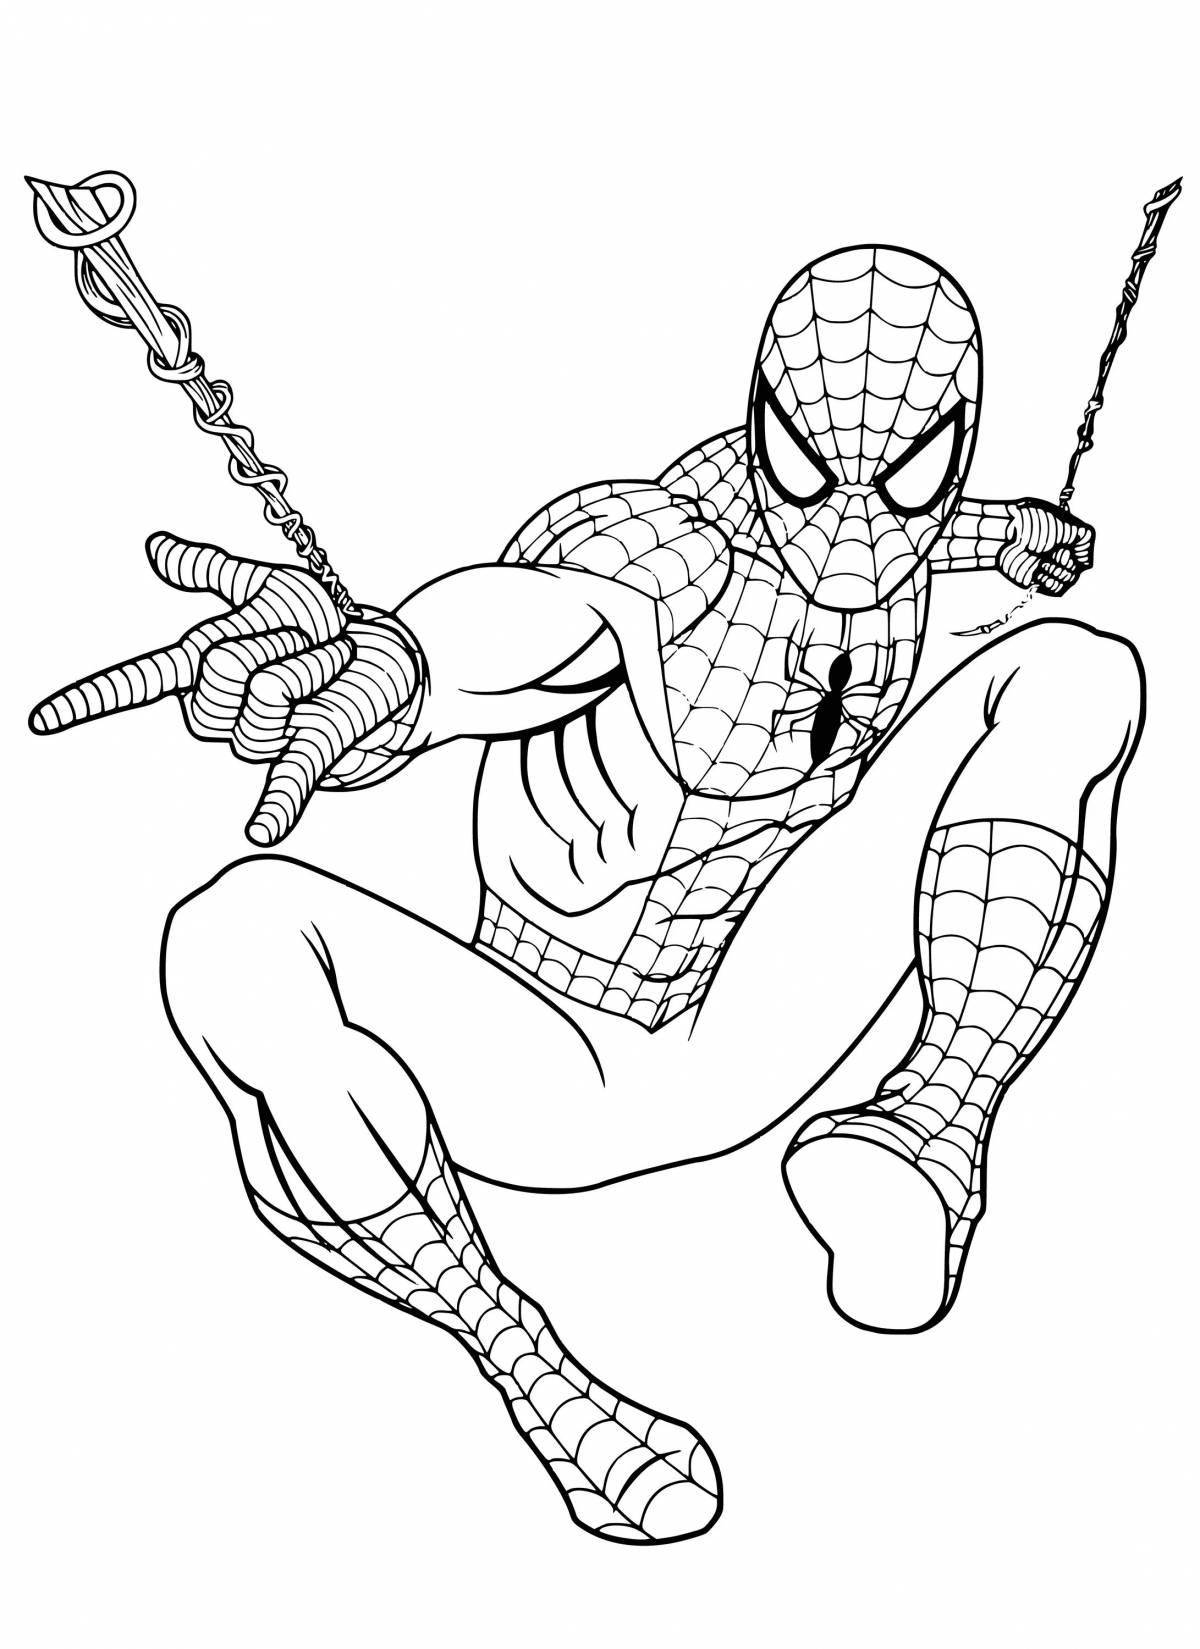 Amazing Spiderman coloring book for kids 6-7 years old